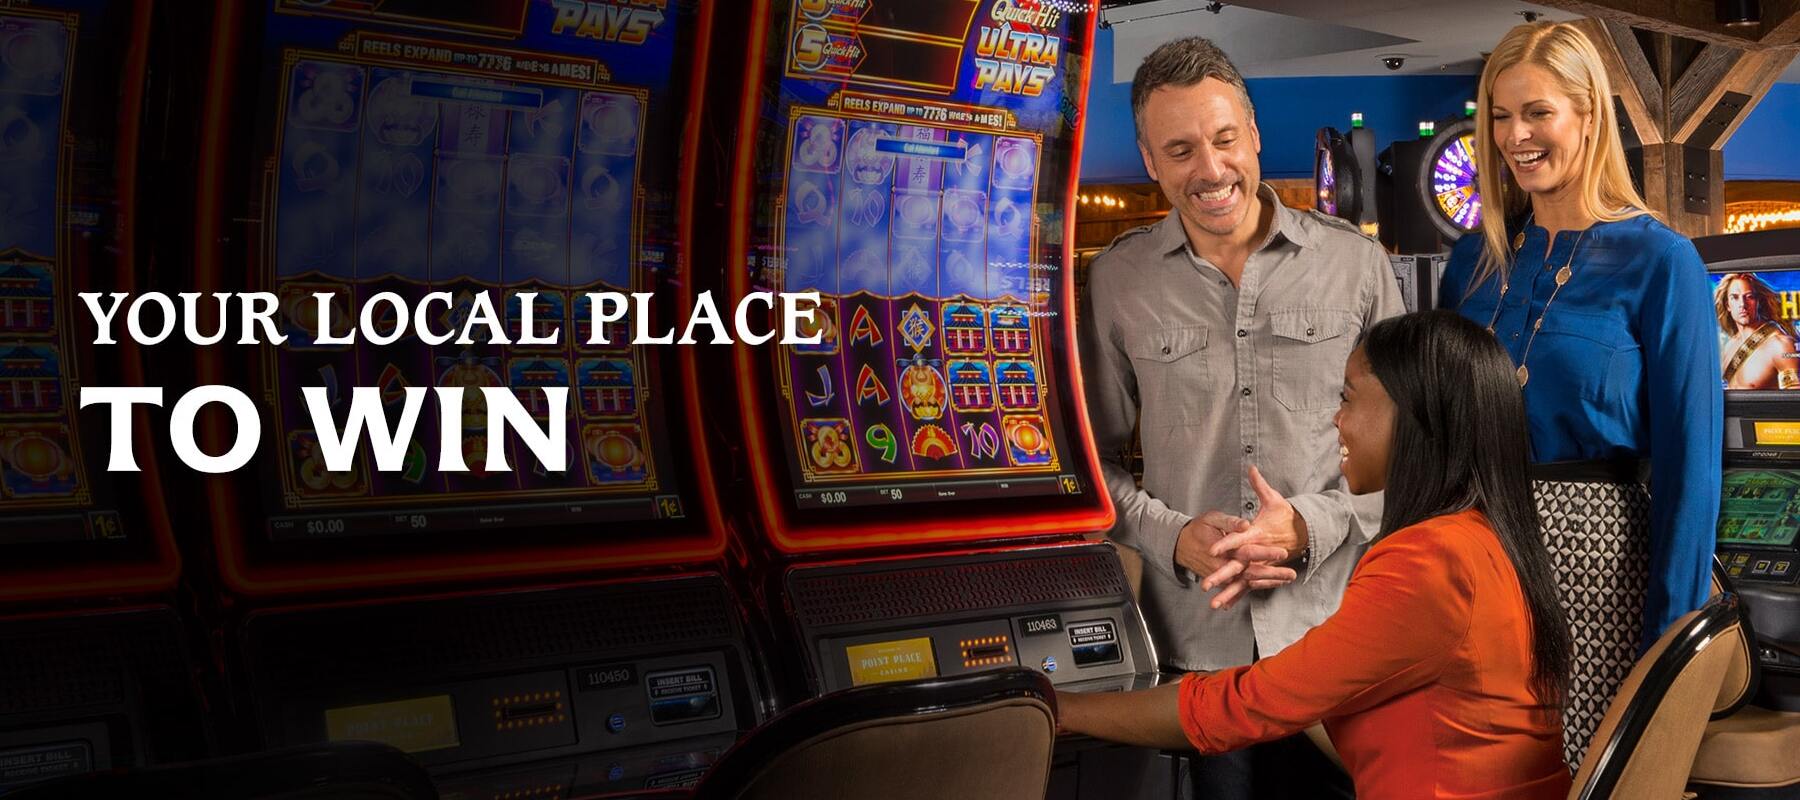 Your local place to win - three friends playing on a slot machine